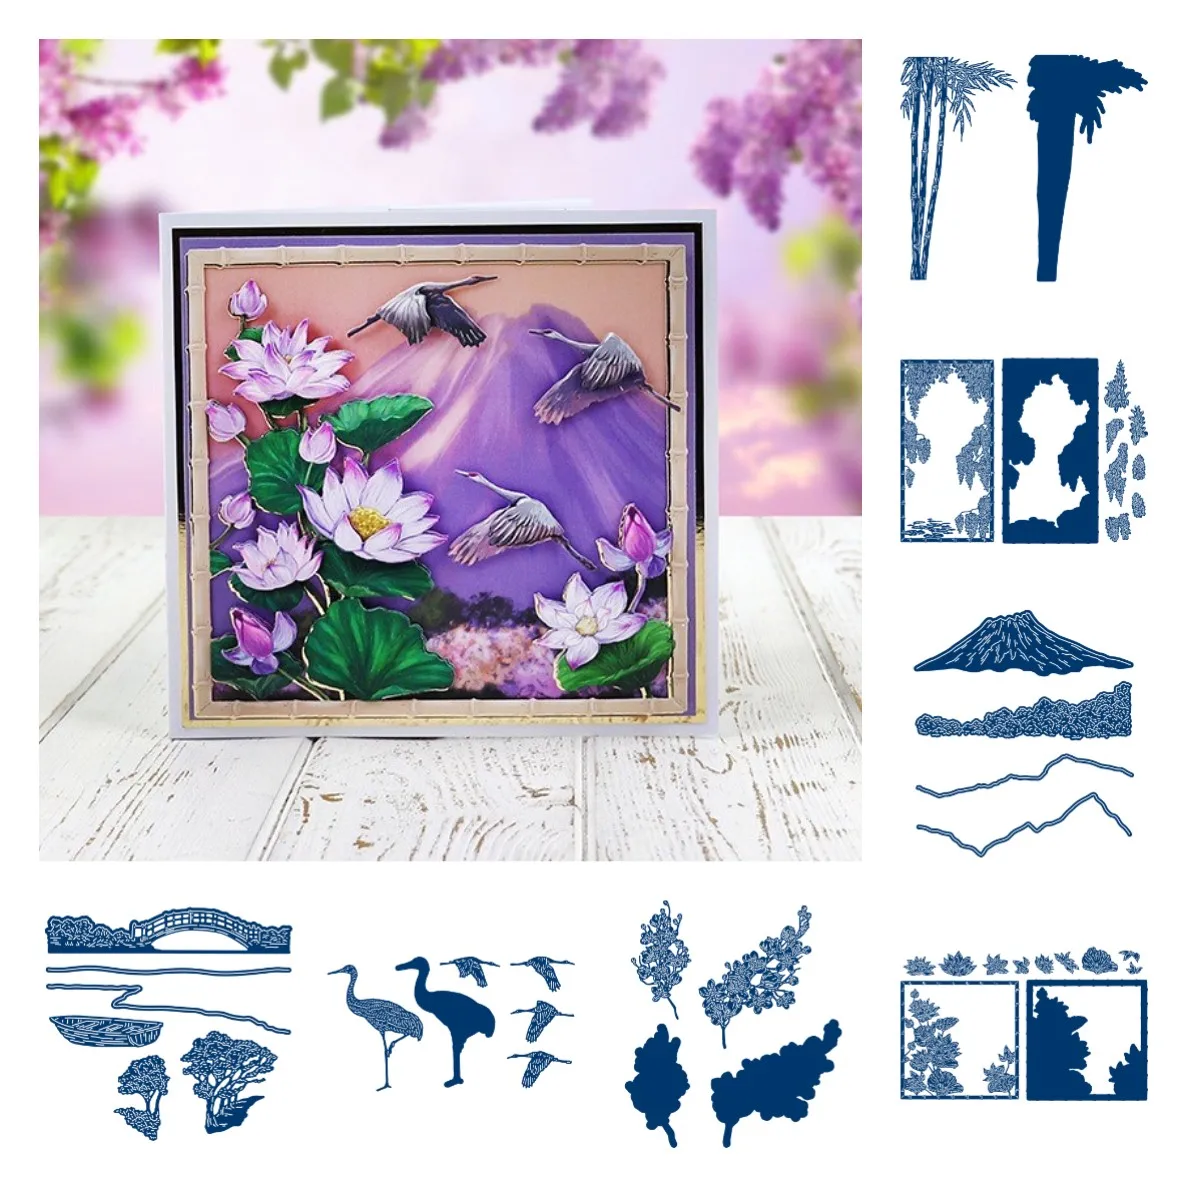 

Water Lily Wisteria Frame Crane Tall Bamboo Cutting Dies Scrapbook Diary Decoration Embossing Template DIY Card Handmade 2021